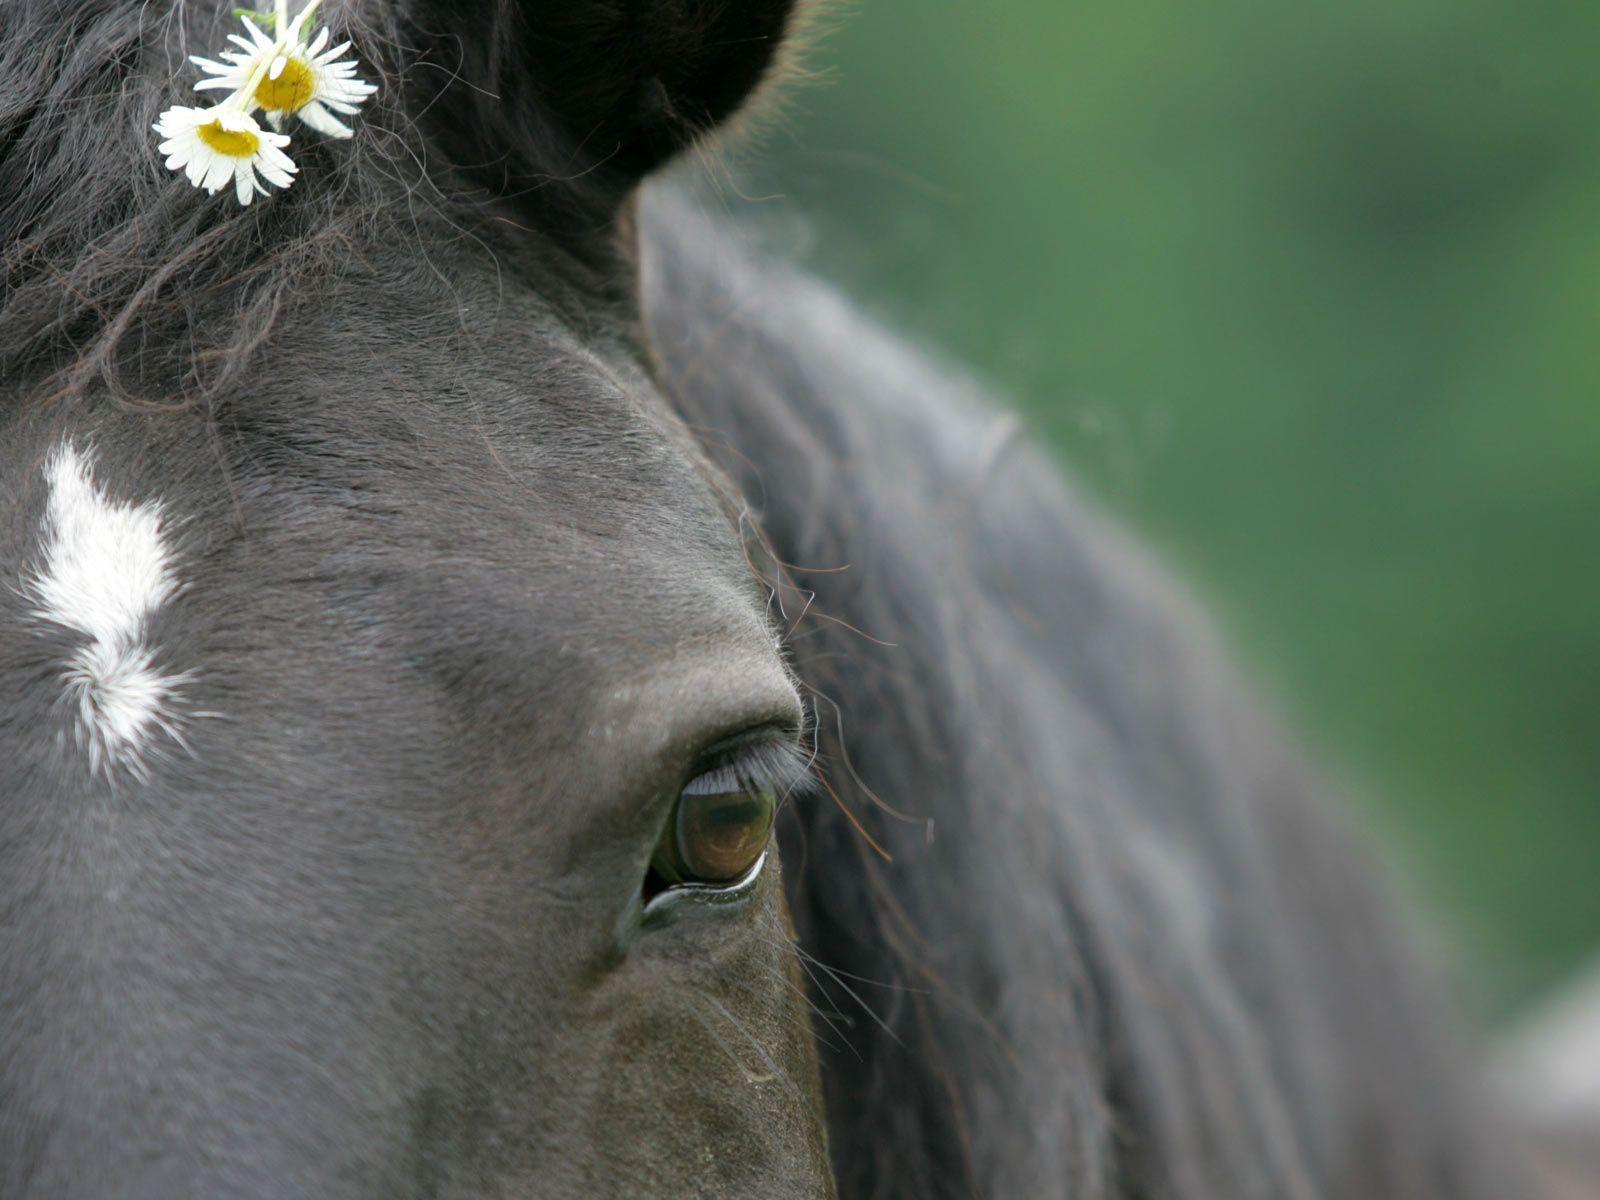 Desktop Wallpaper · Gallery · Animals · The Soul of a Horse. Free